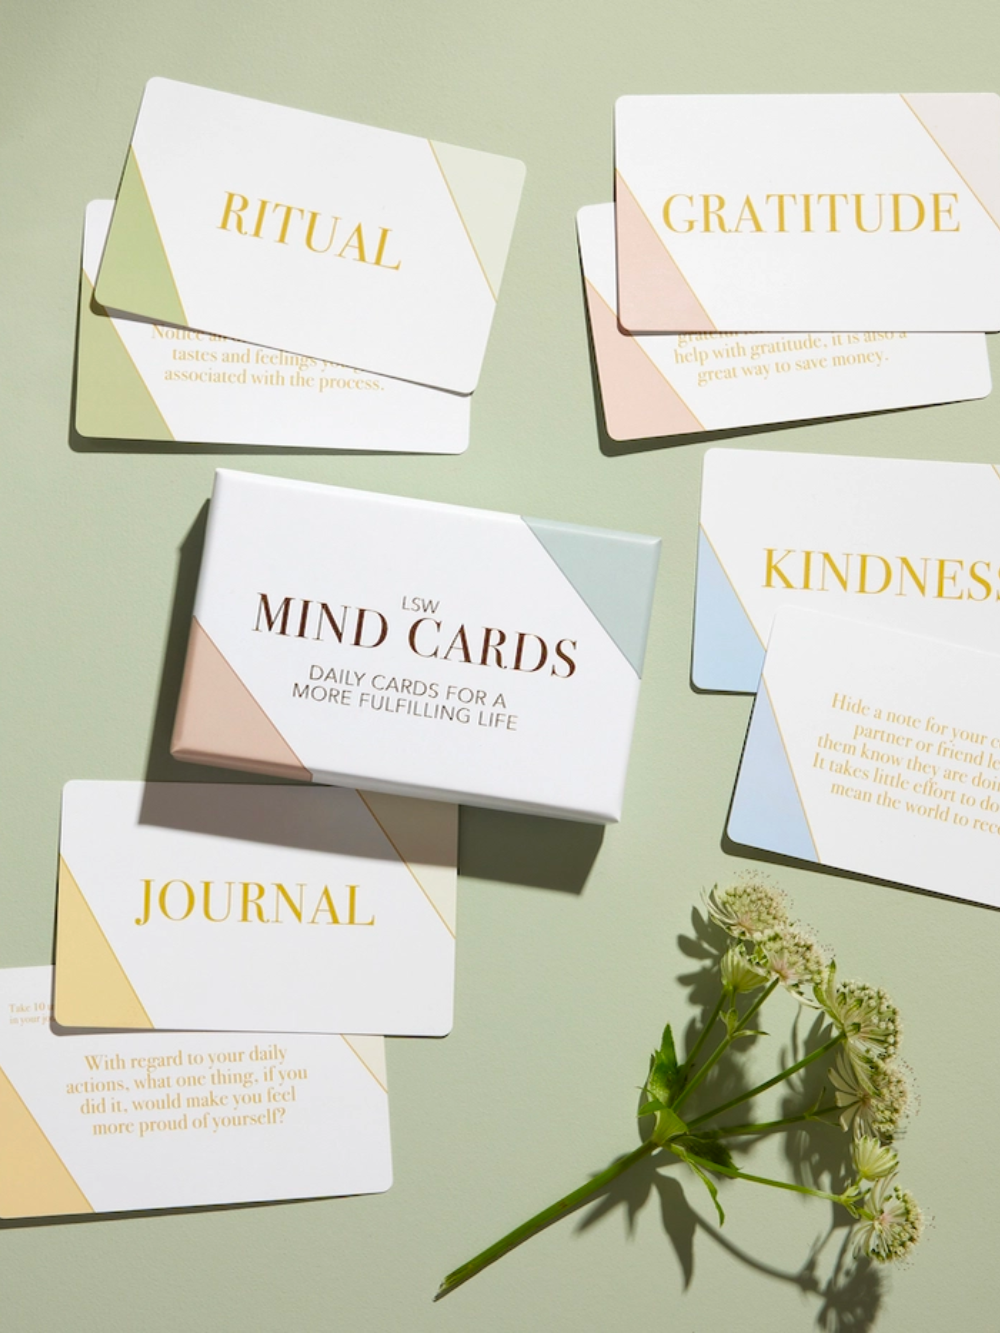 The Peace Of Mind Gift Box